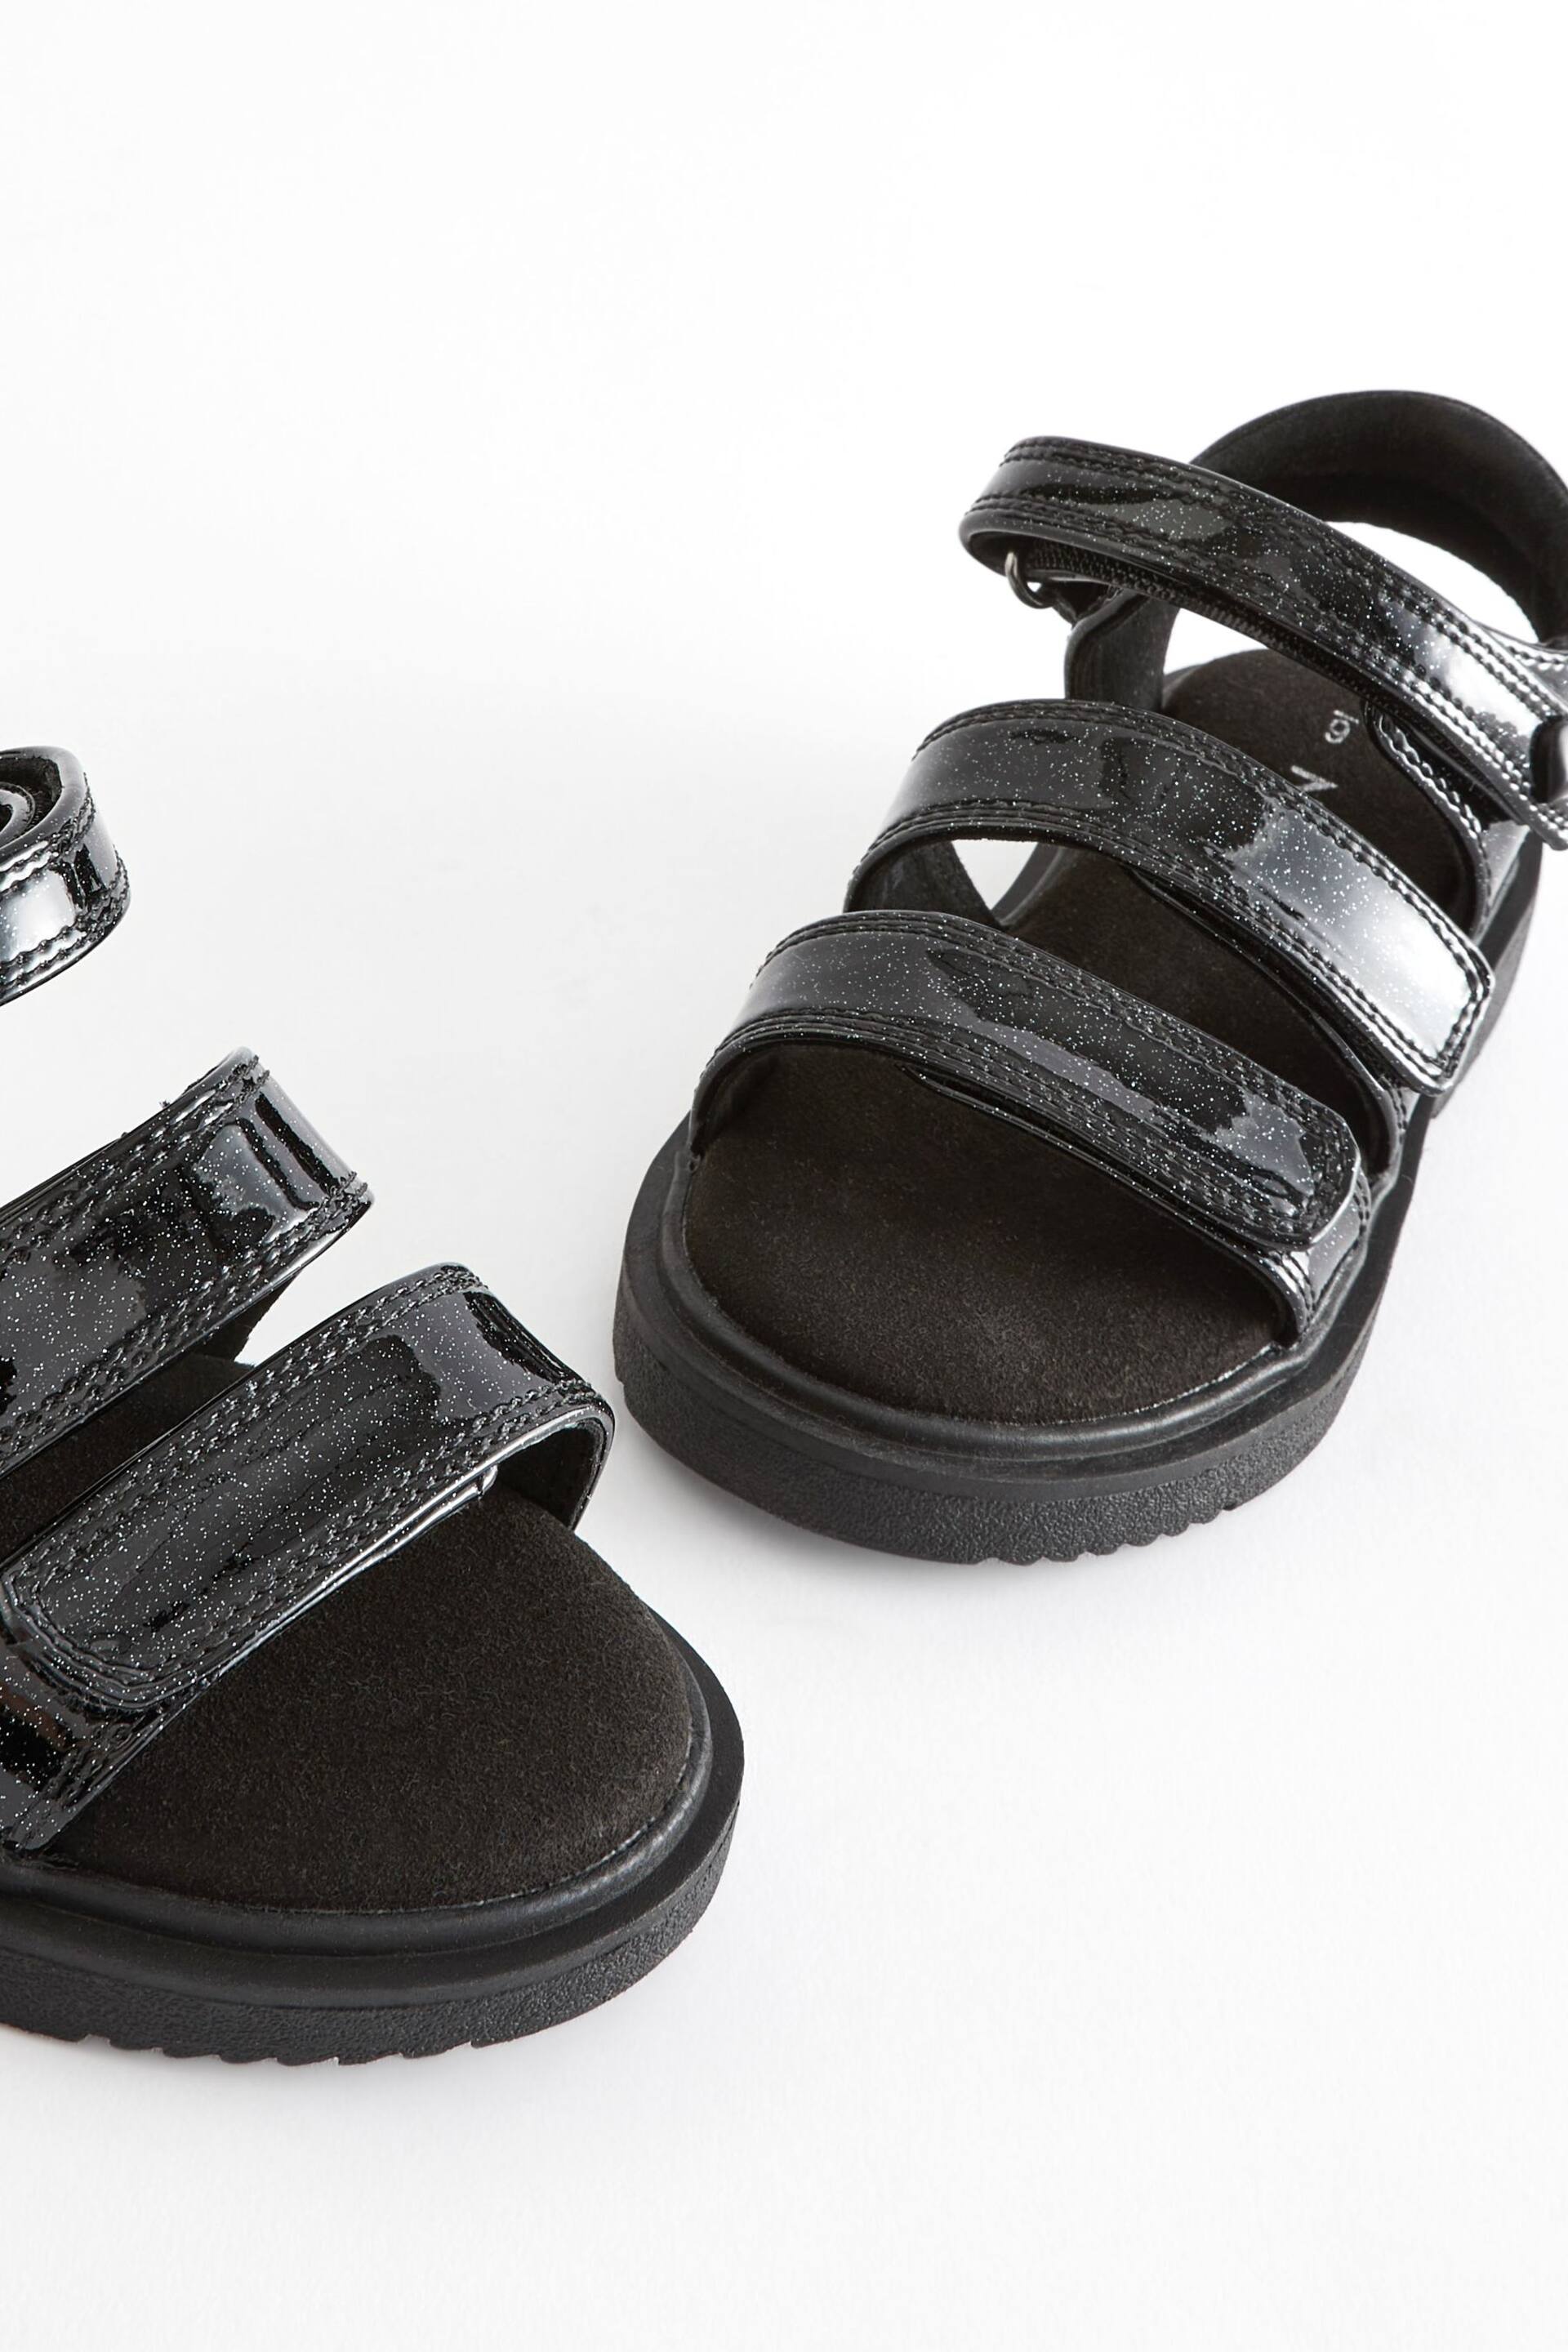 Black Chunky Sandals - Image 8 of 11